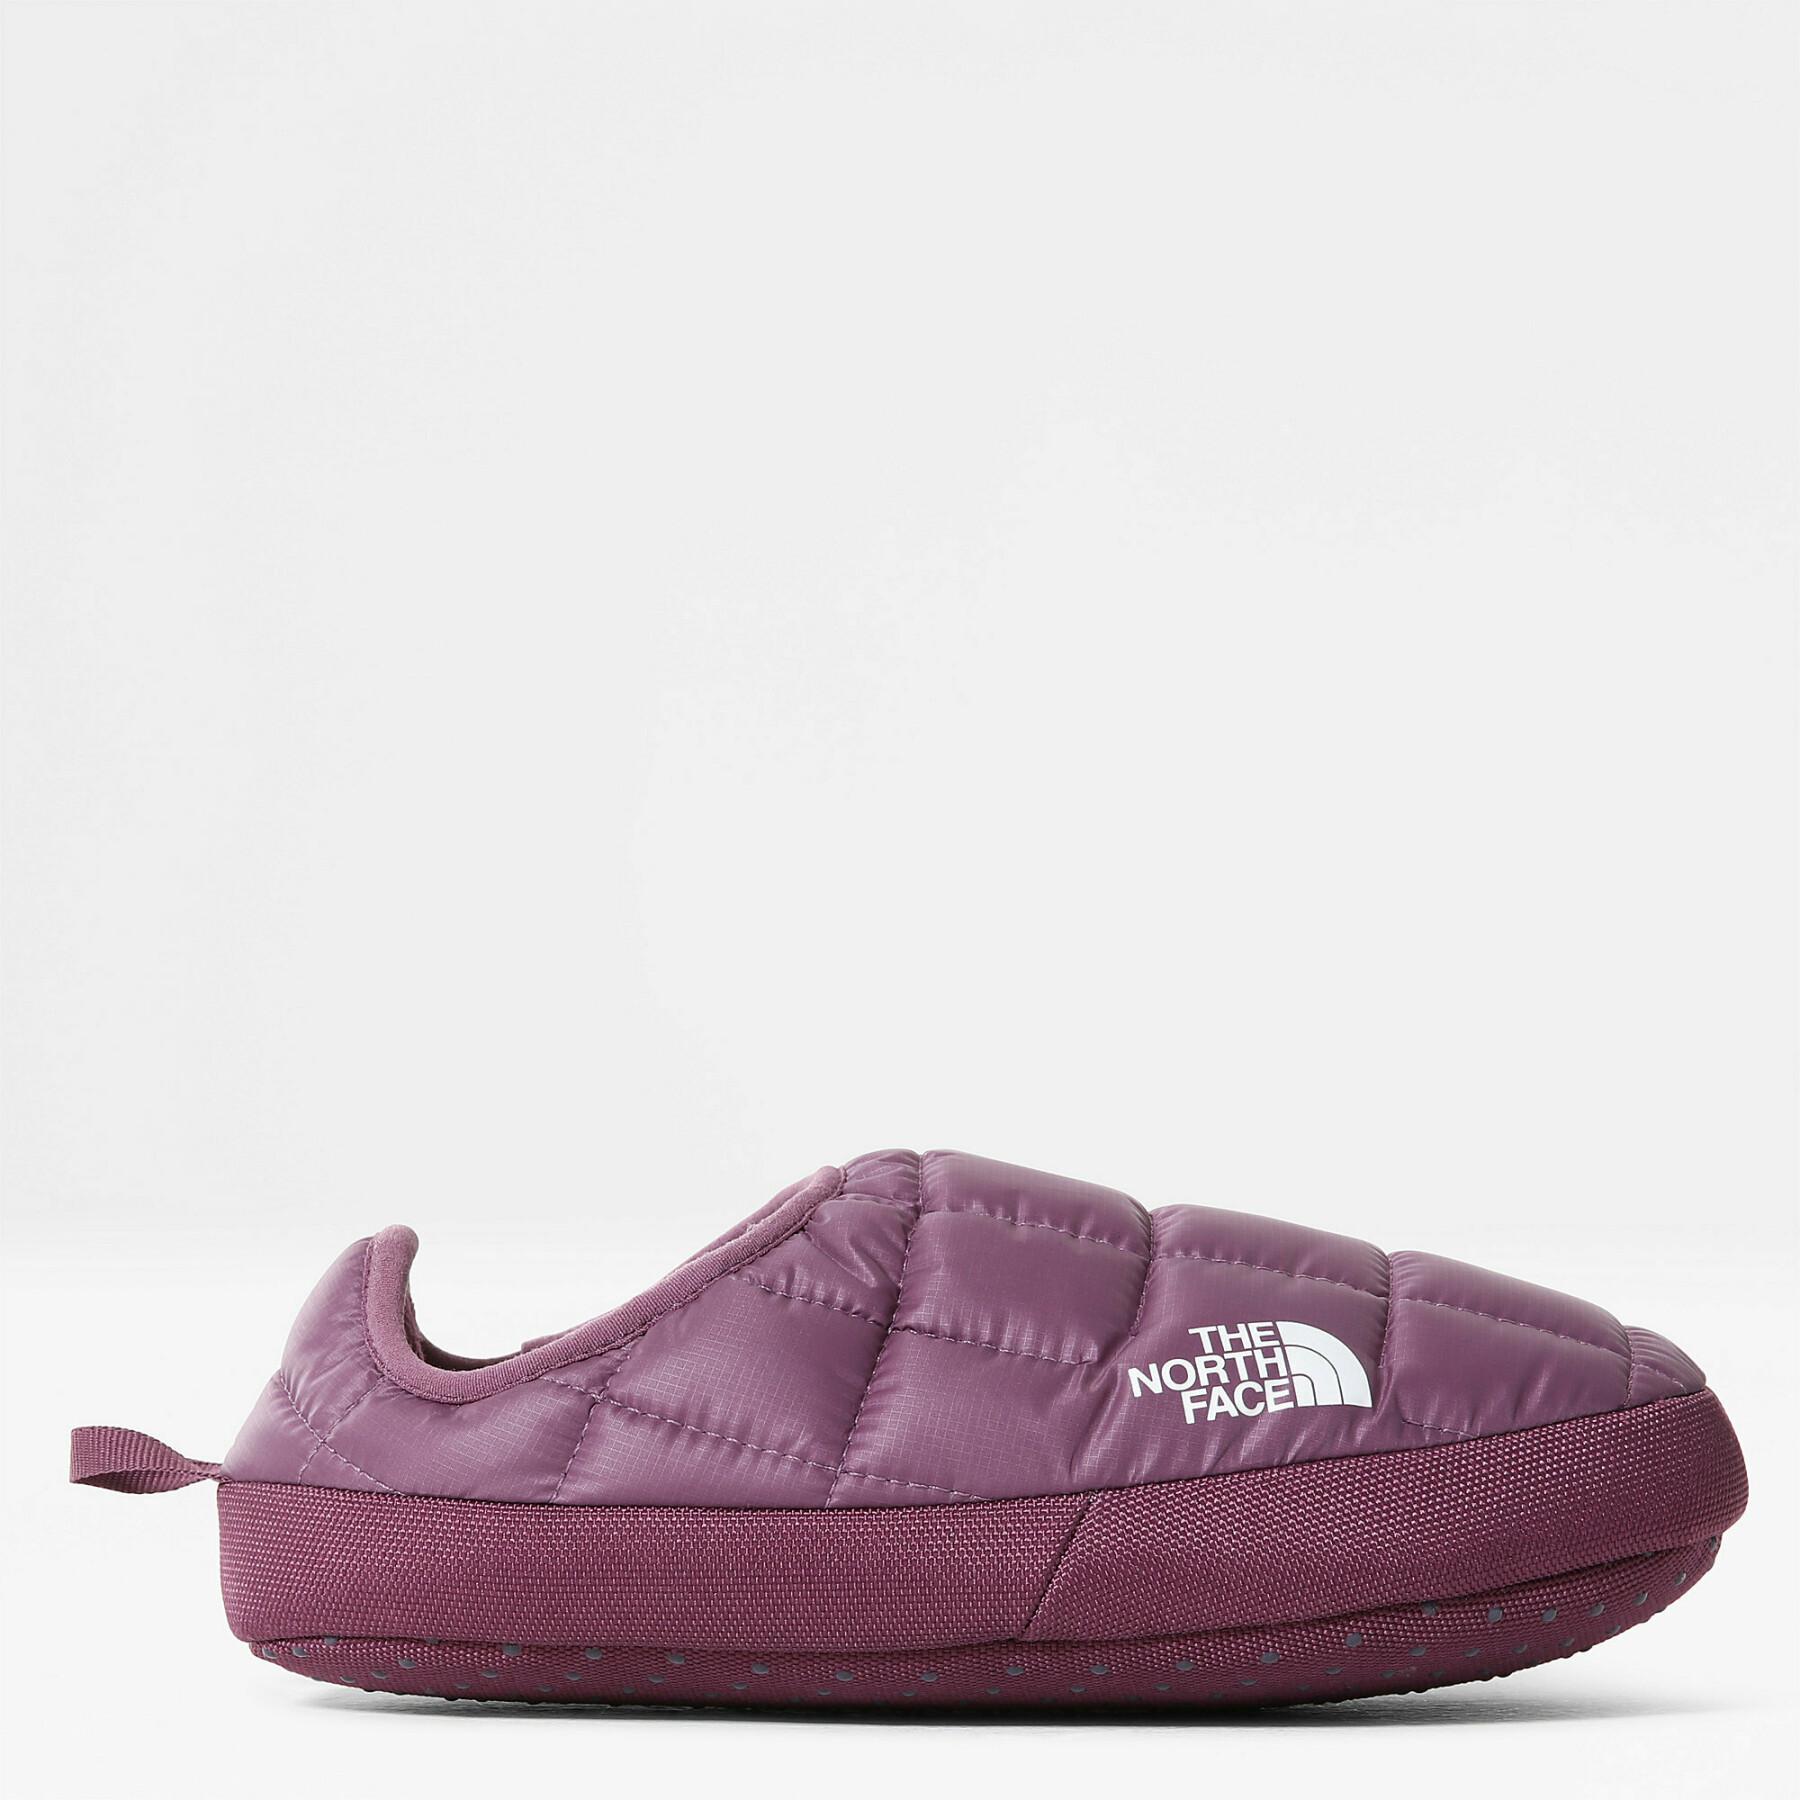 Pantufas femininas The North Face Thermoball Tent V